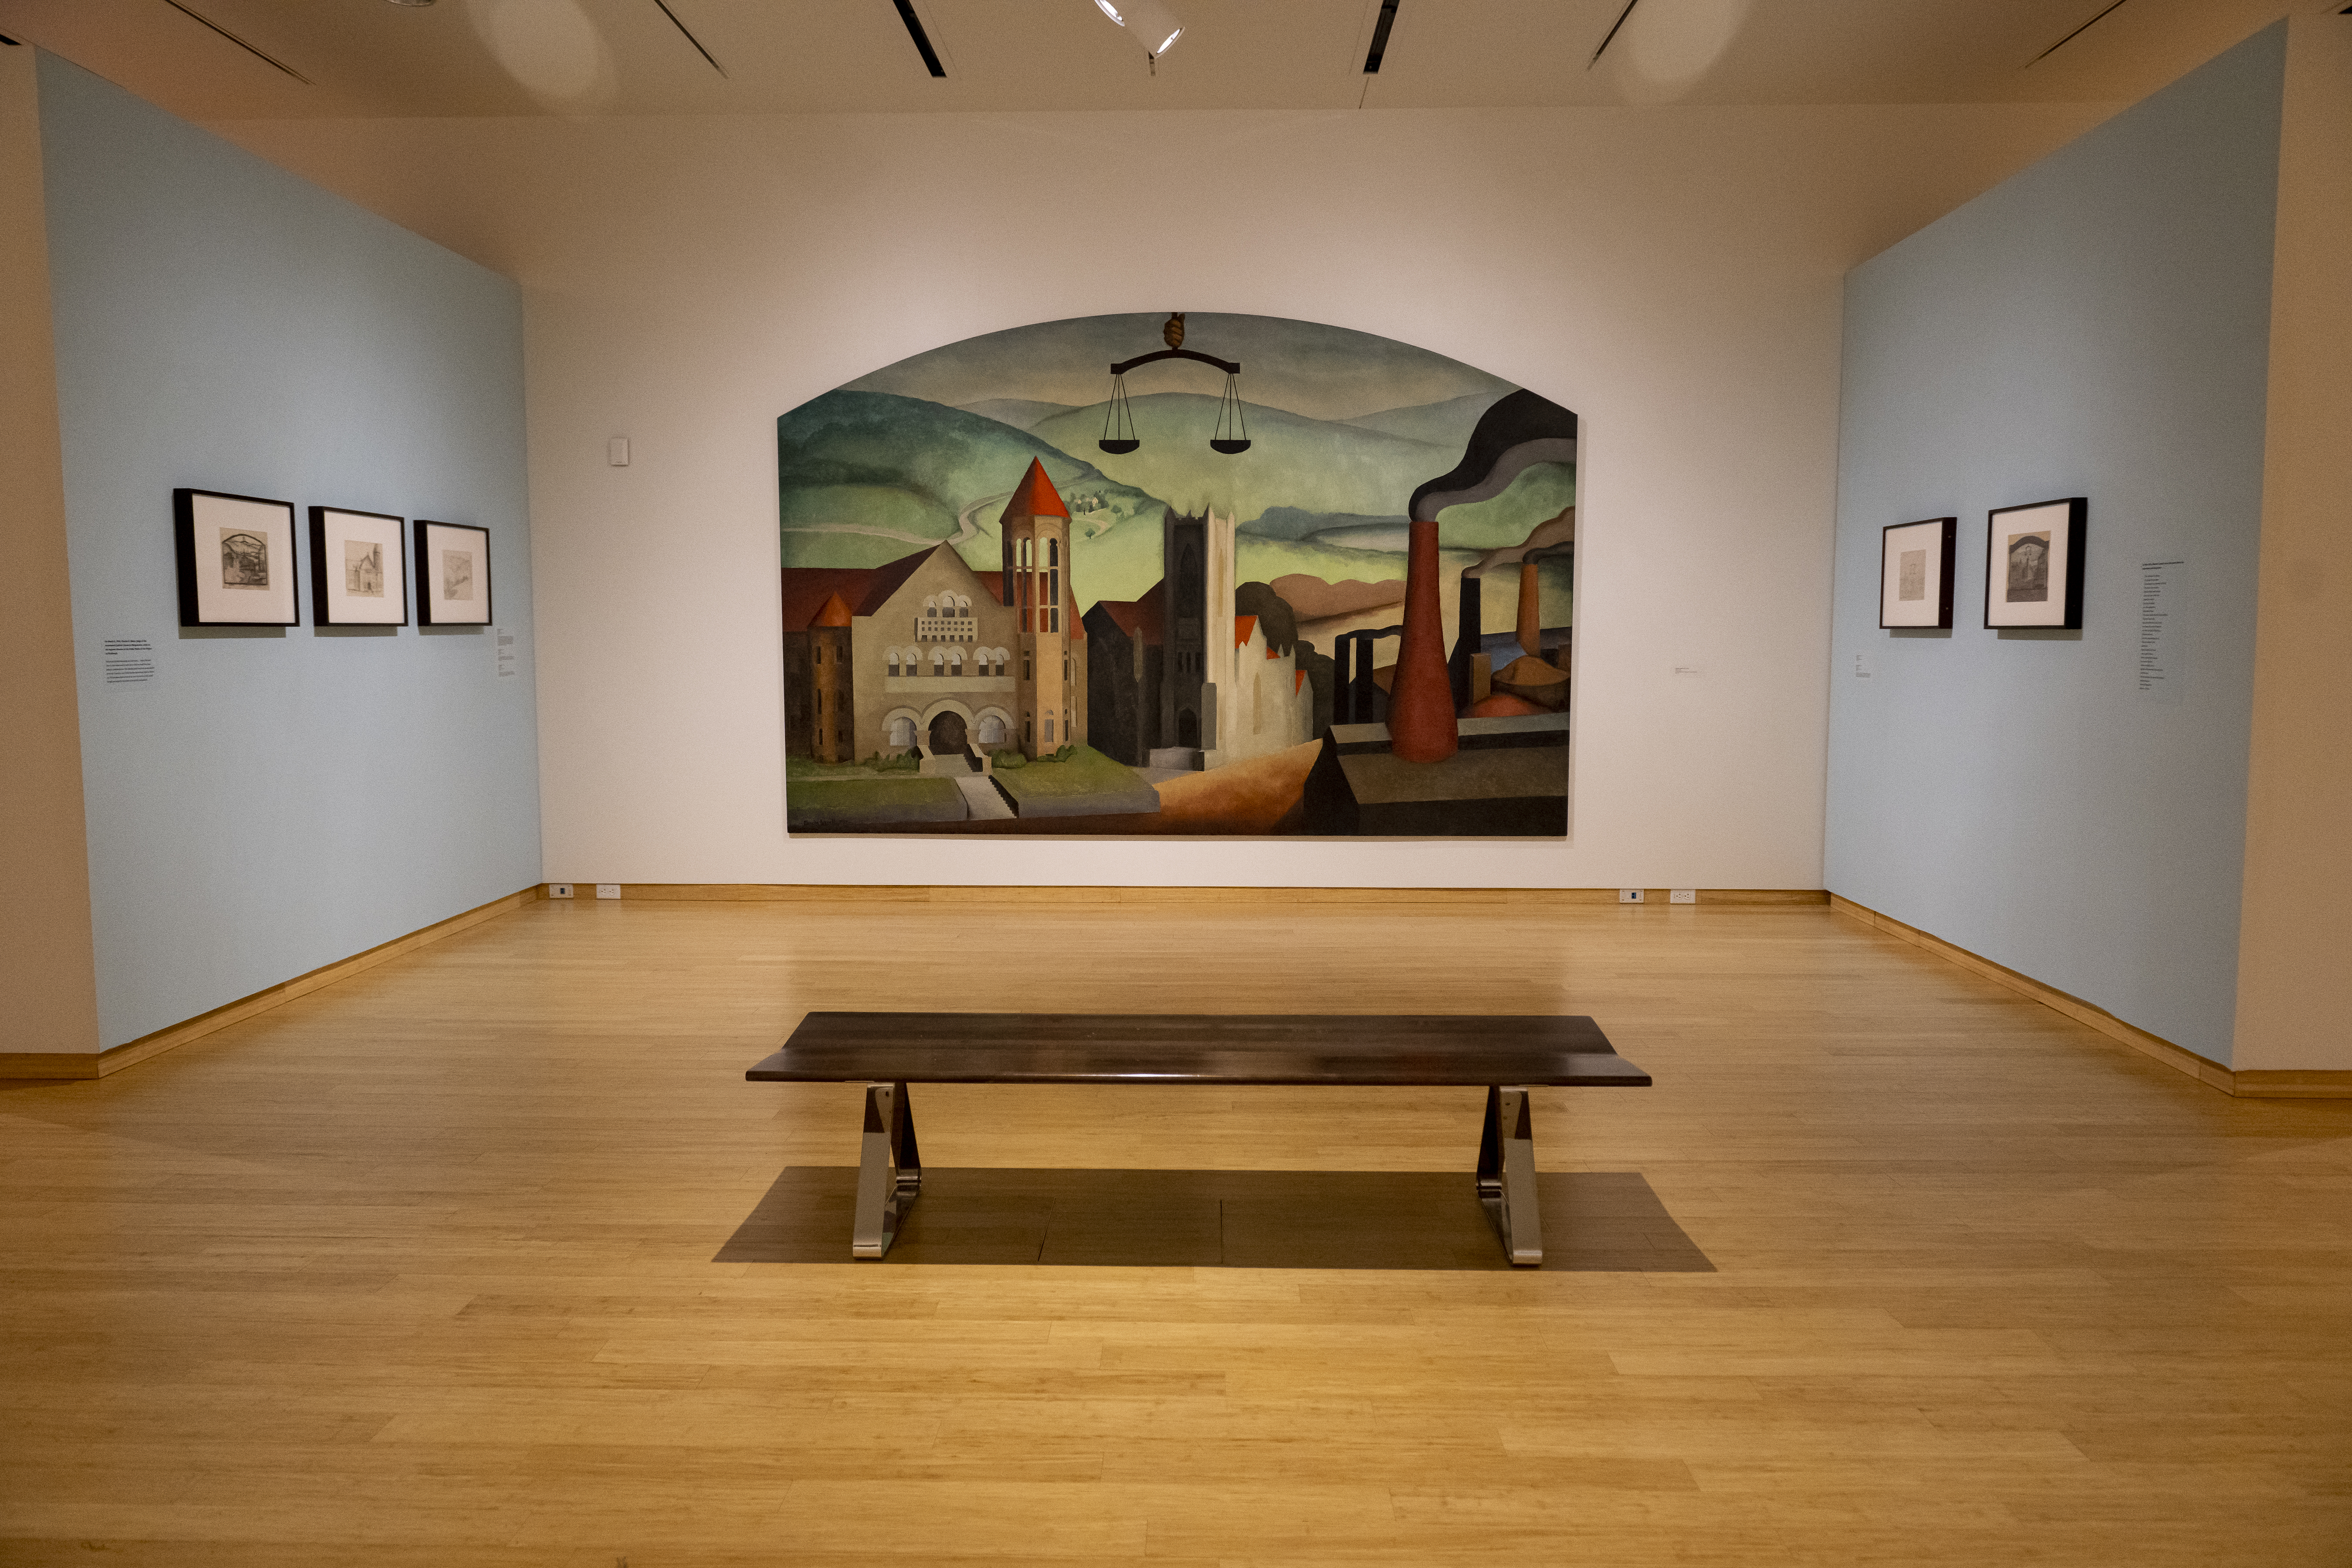 A $1 million gift from William and Patricia Bright will help expand the Blanche Lazzell collection at the Art Museum of WVU. Lazzell’s “Justice” mural was displayed this spring in the Museum’s lower gallery. 